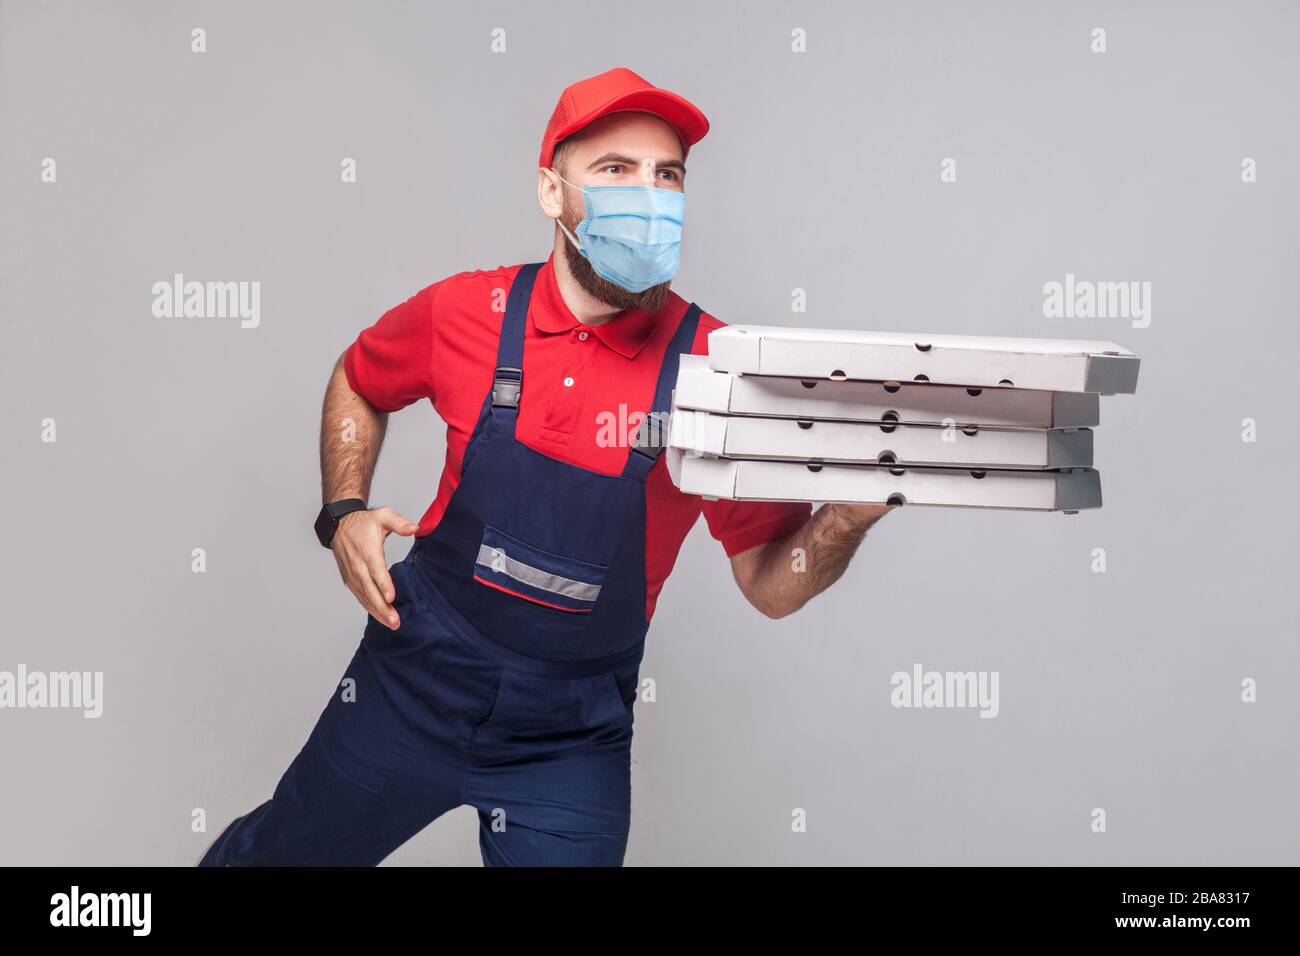 Delivery pizza on quarantine. Hurry up! Young man with surgical medical mask in blue uniform and red t-shirt holding stack pizza boxes and running to Stock Photo